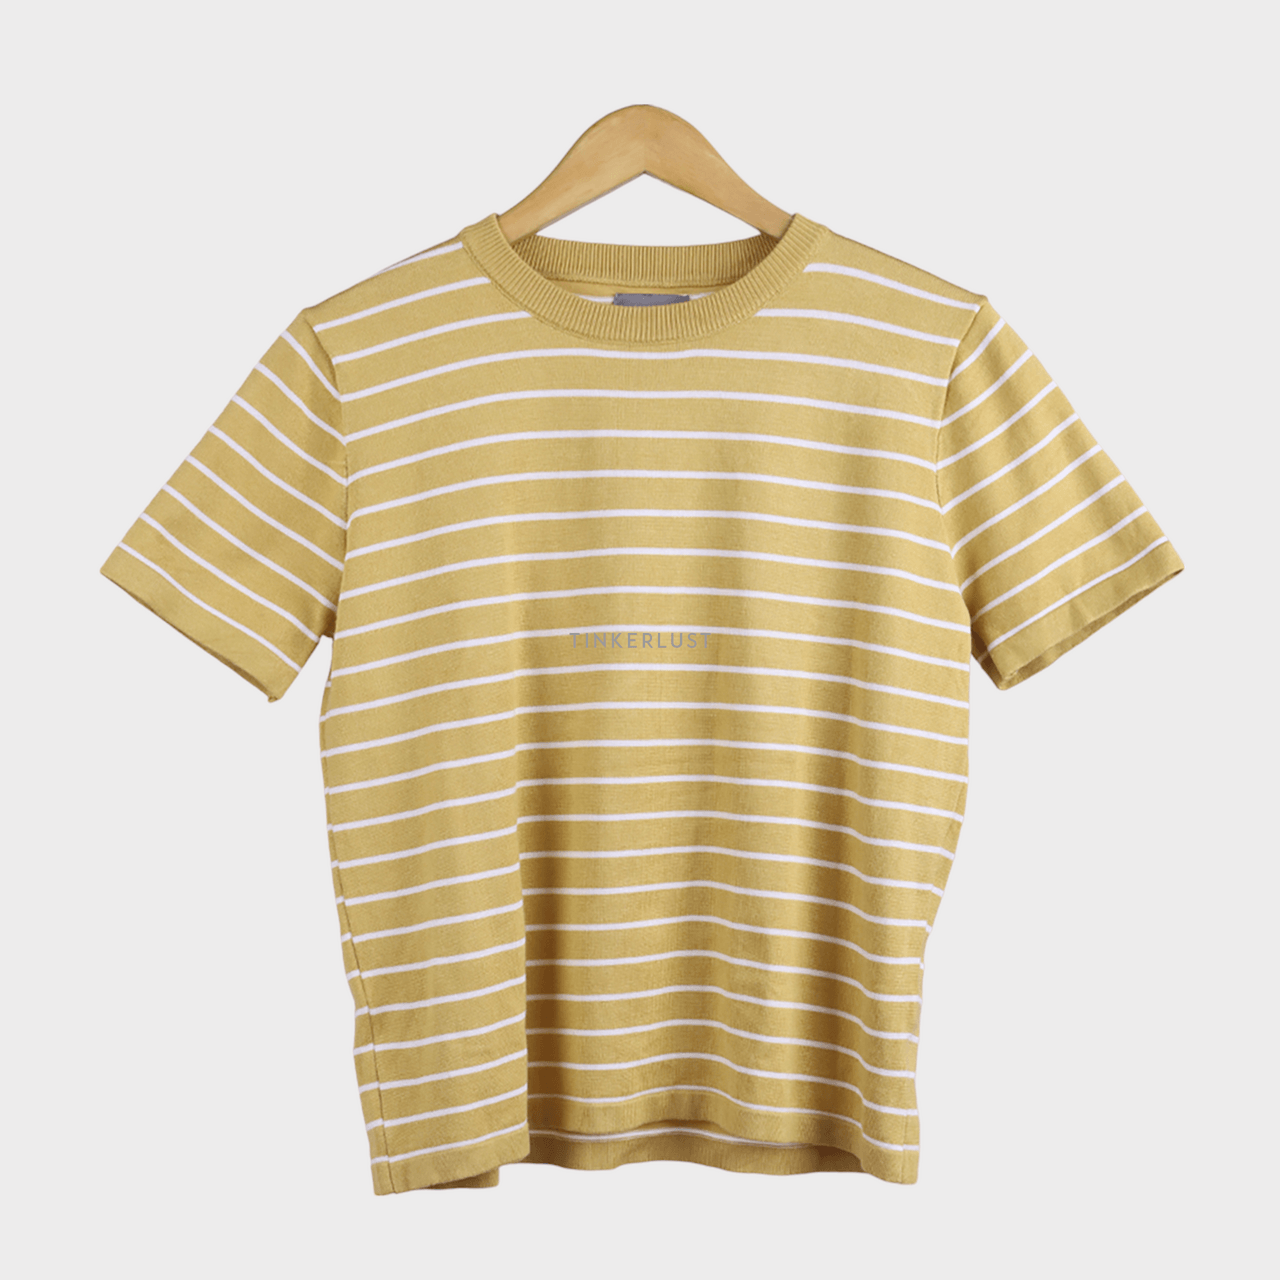 This is April White & Mustard Stripes Knit Blouse